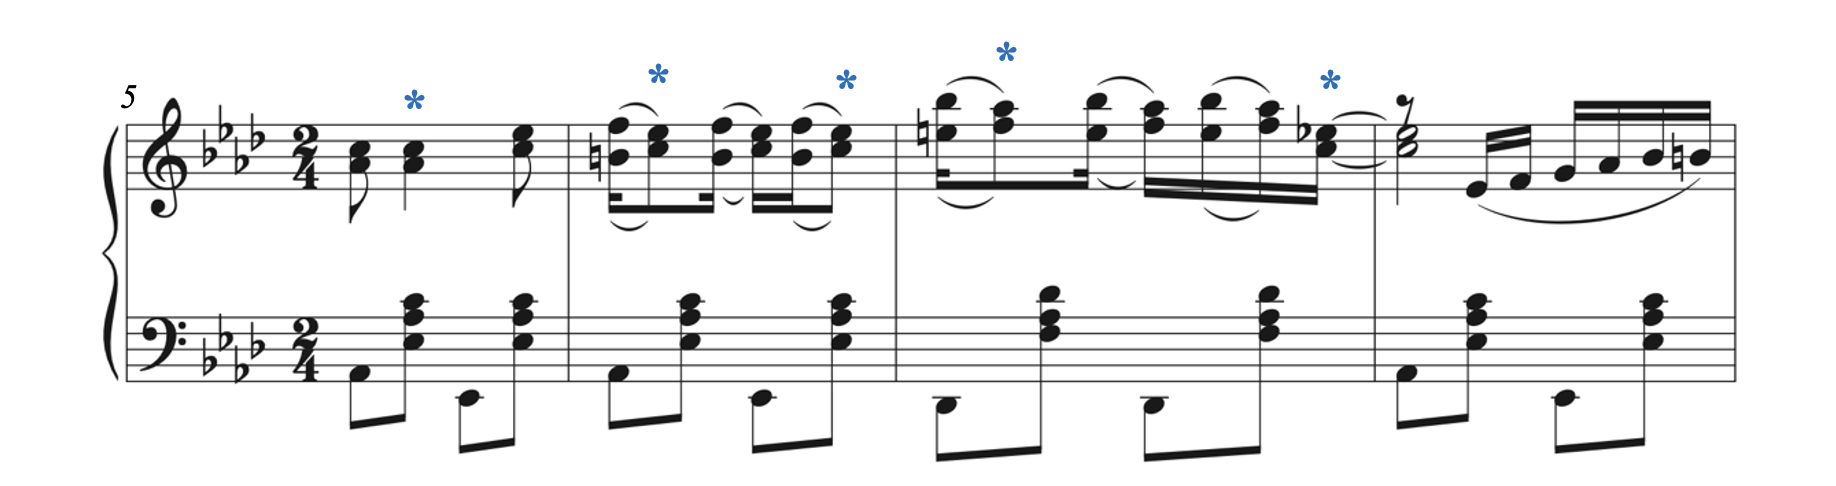 Score to measures 5 to 8 of Joplin's The Easy Winners. Asterisks show where syncopations occur and are described in detail in the following text.